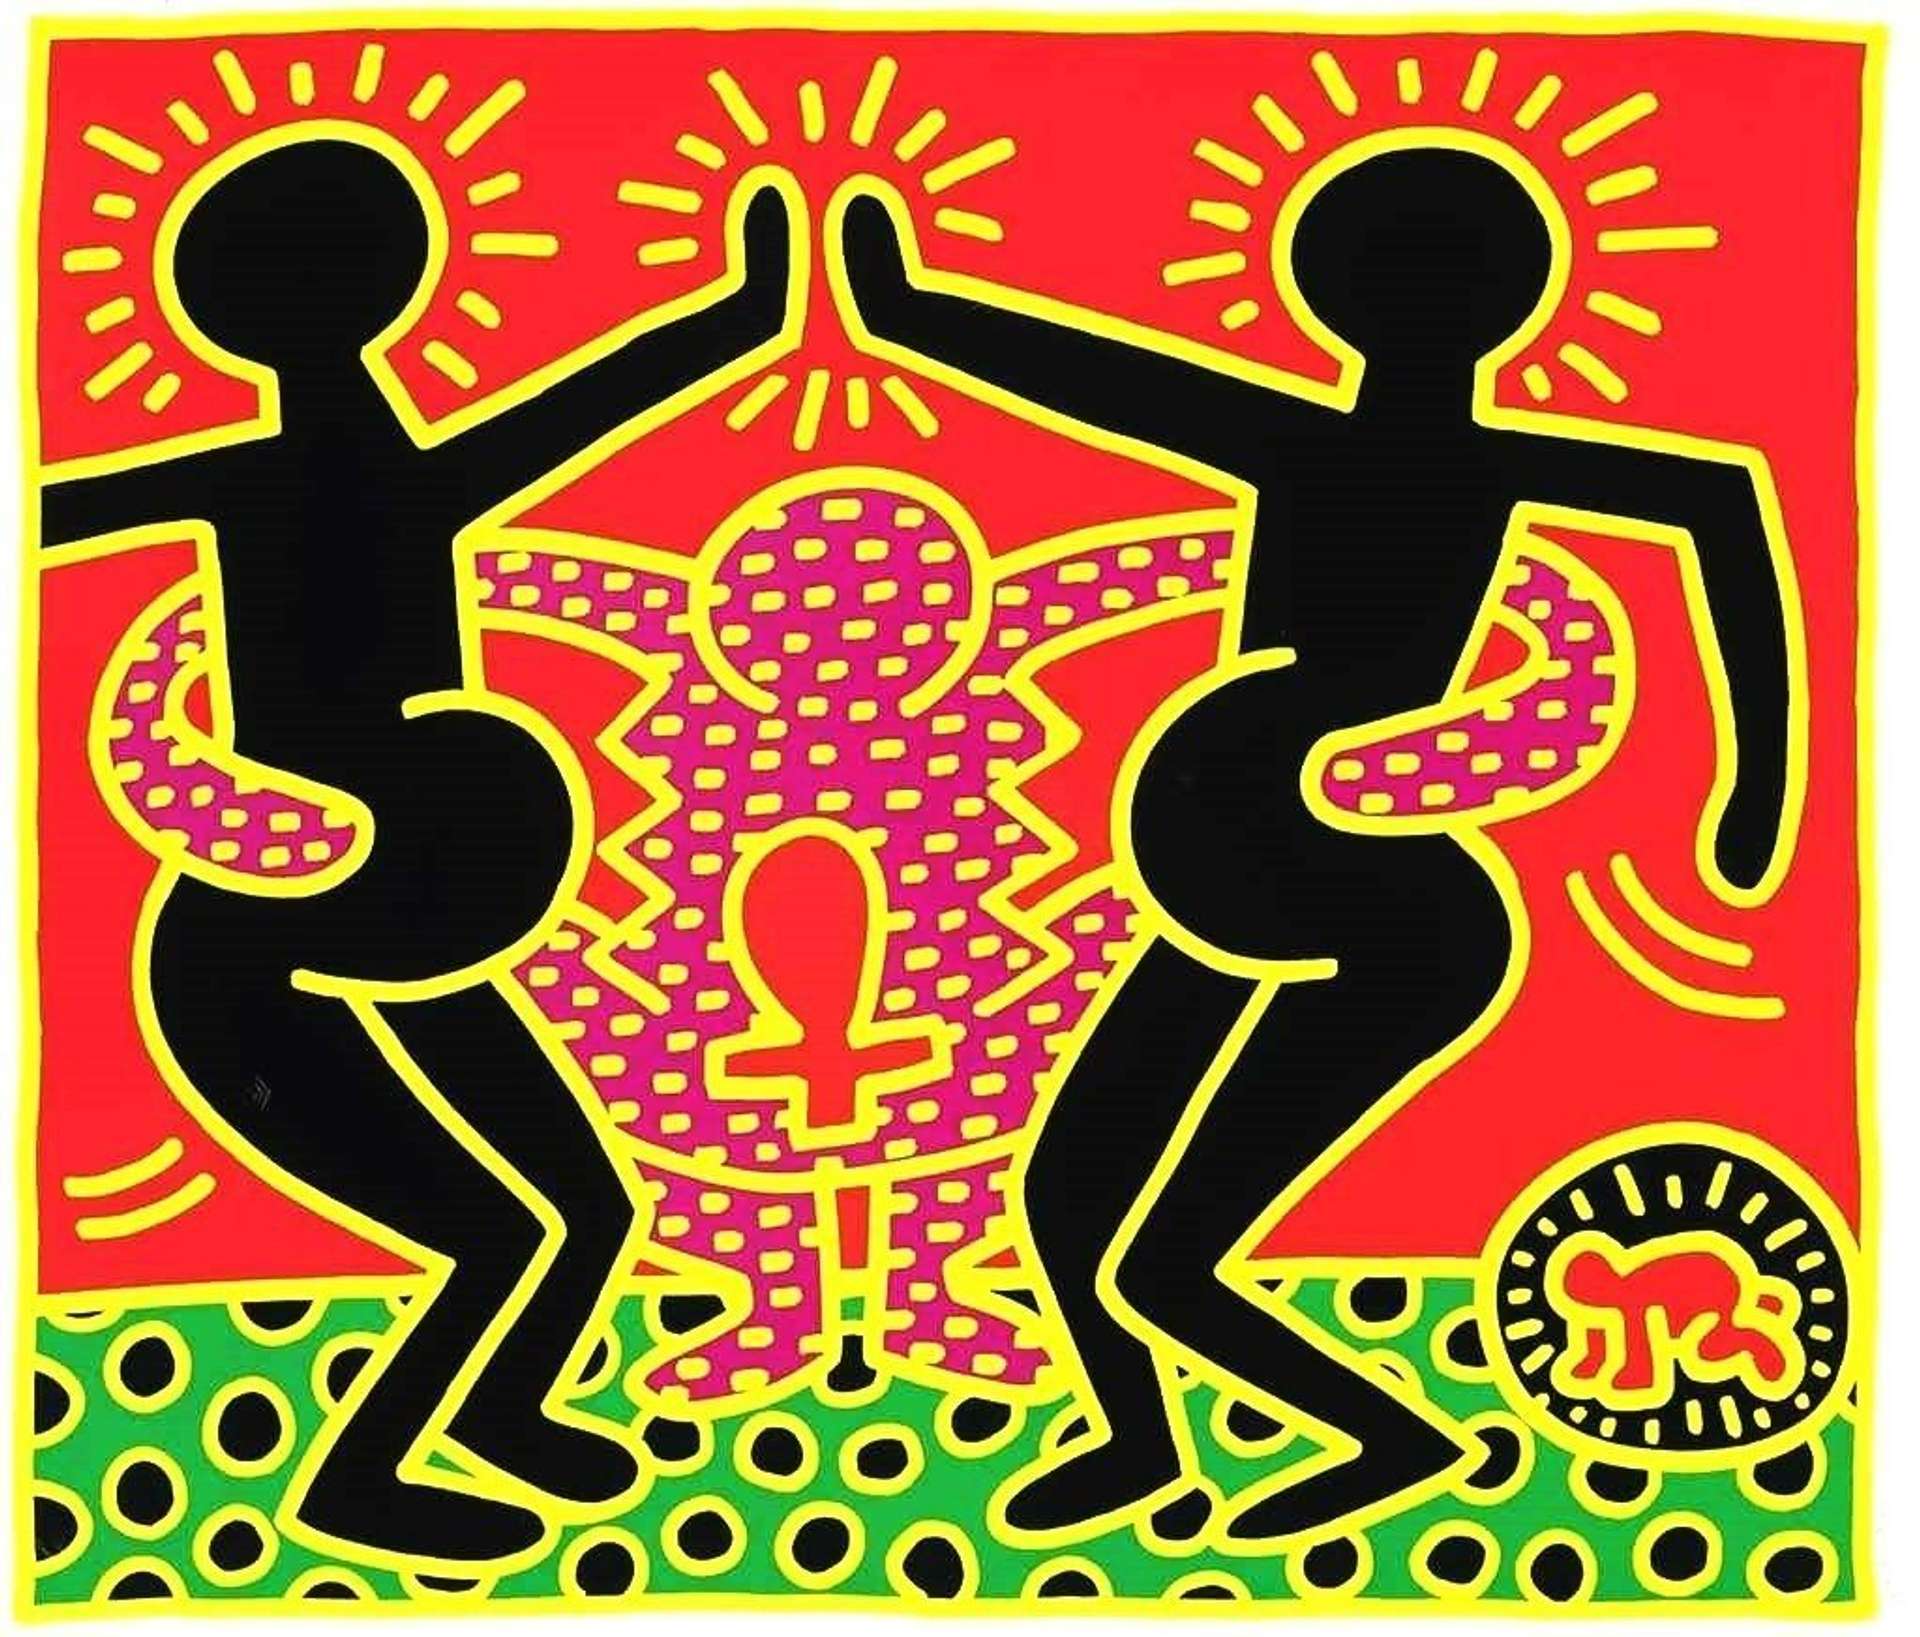 Fertility 4 by Keith Haring